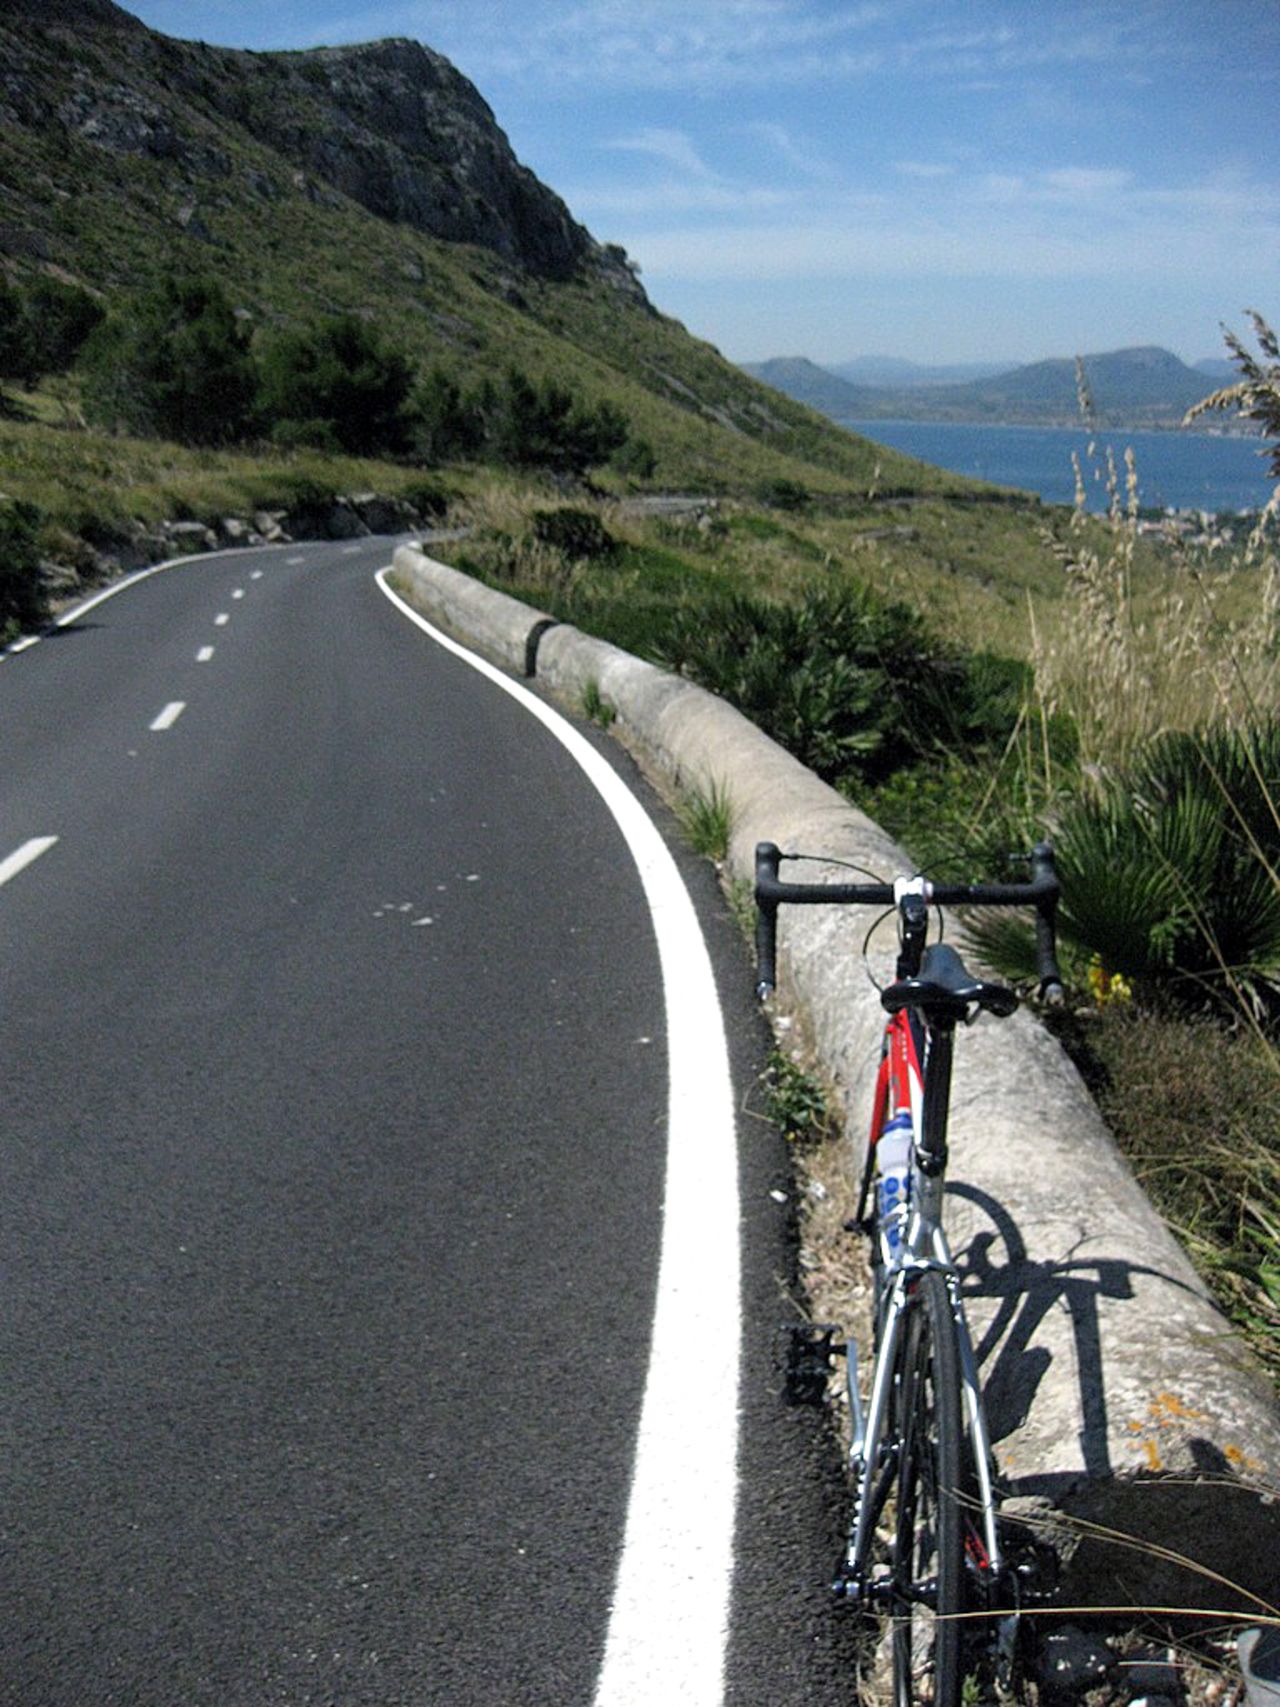 DuVine Adventures' Mallorca tour pairs seaside cycling with stays in luxury hotels. Not a bad way to exert yourself.